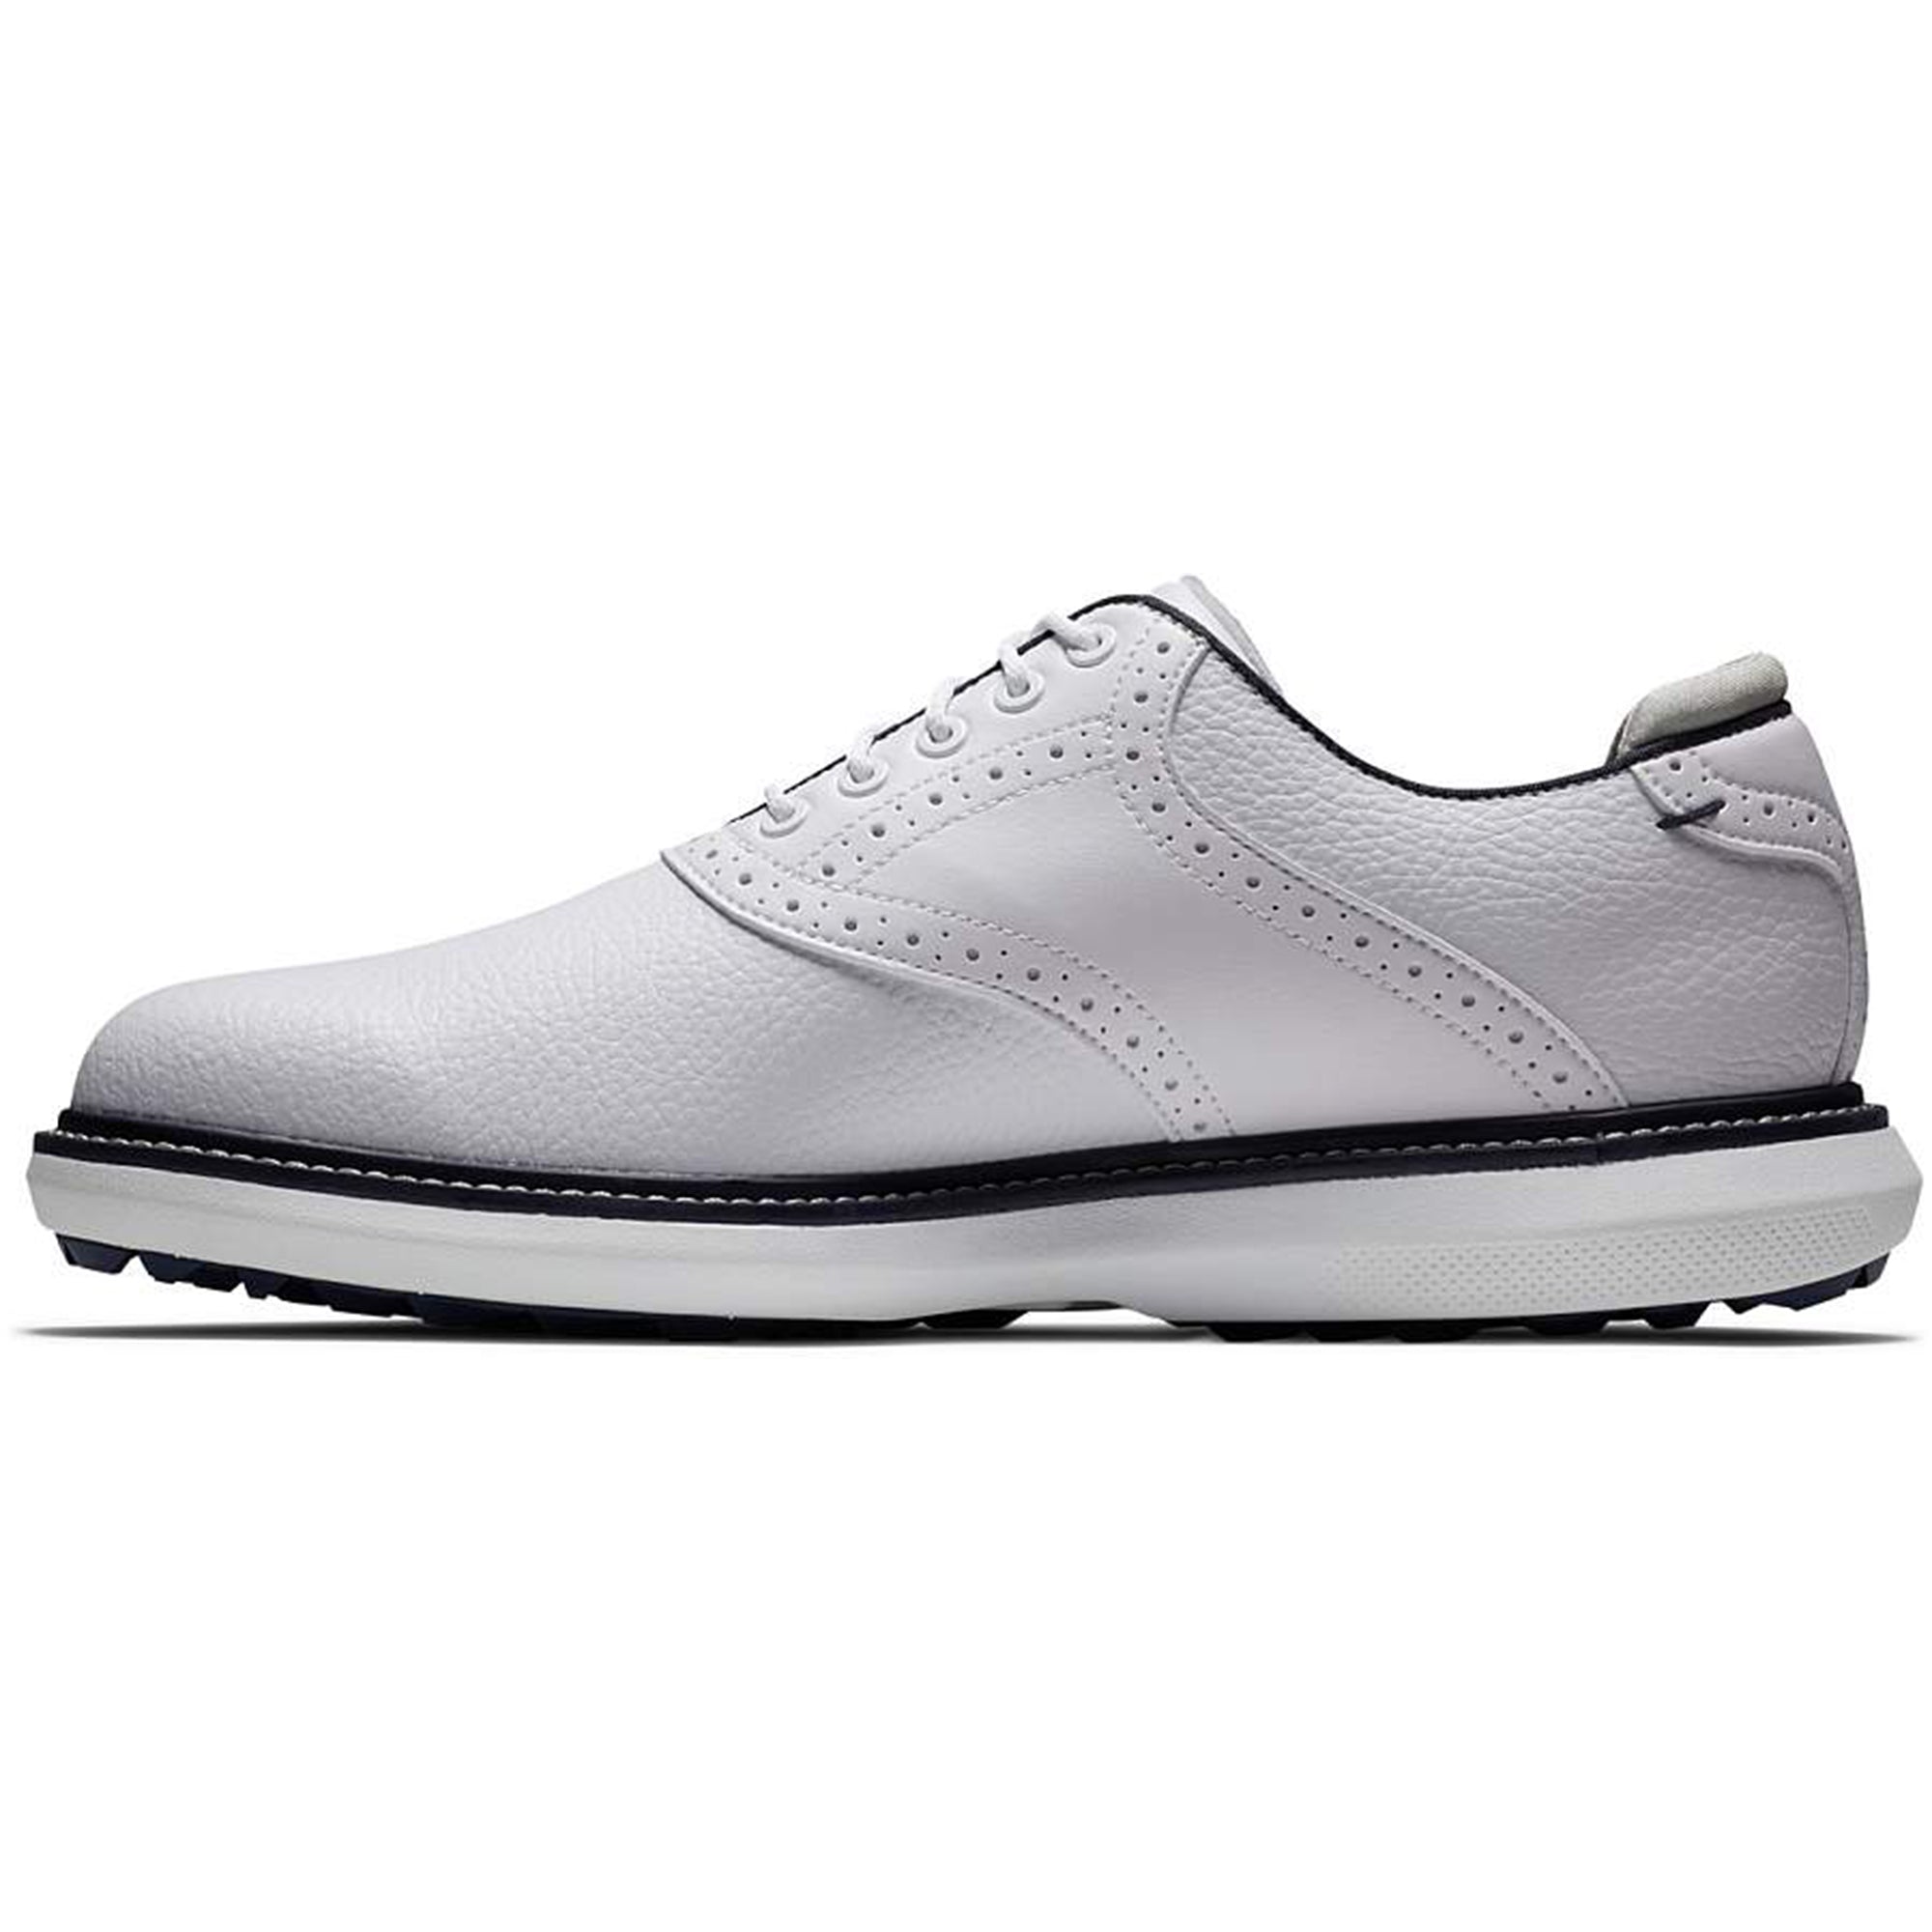 FootJoy 23 Traditions Spikeless